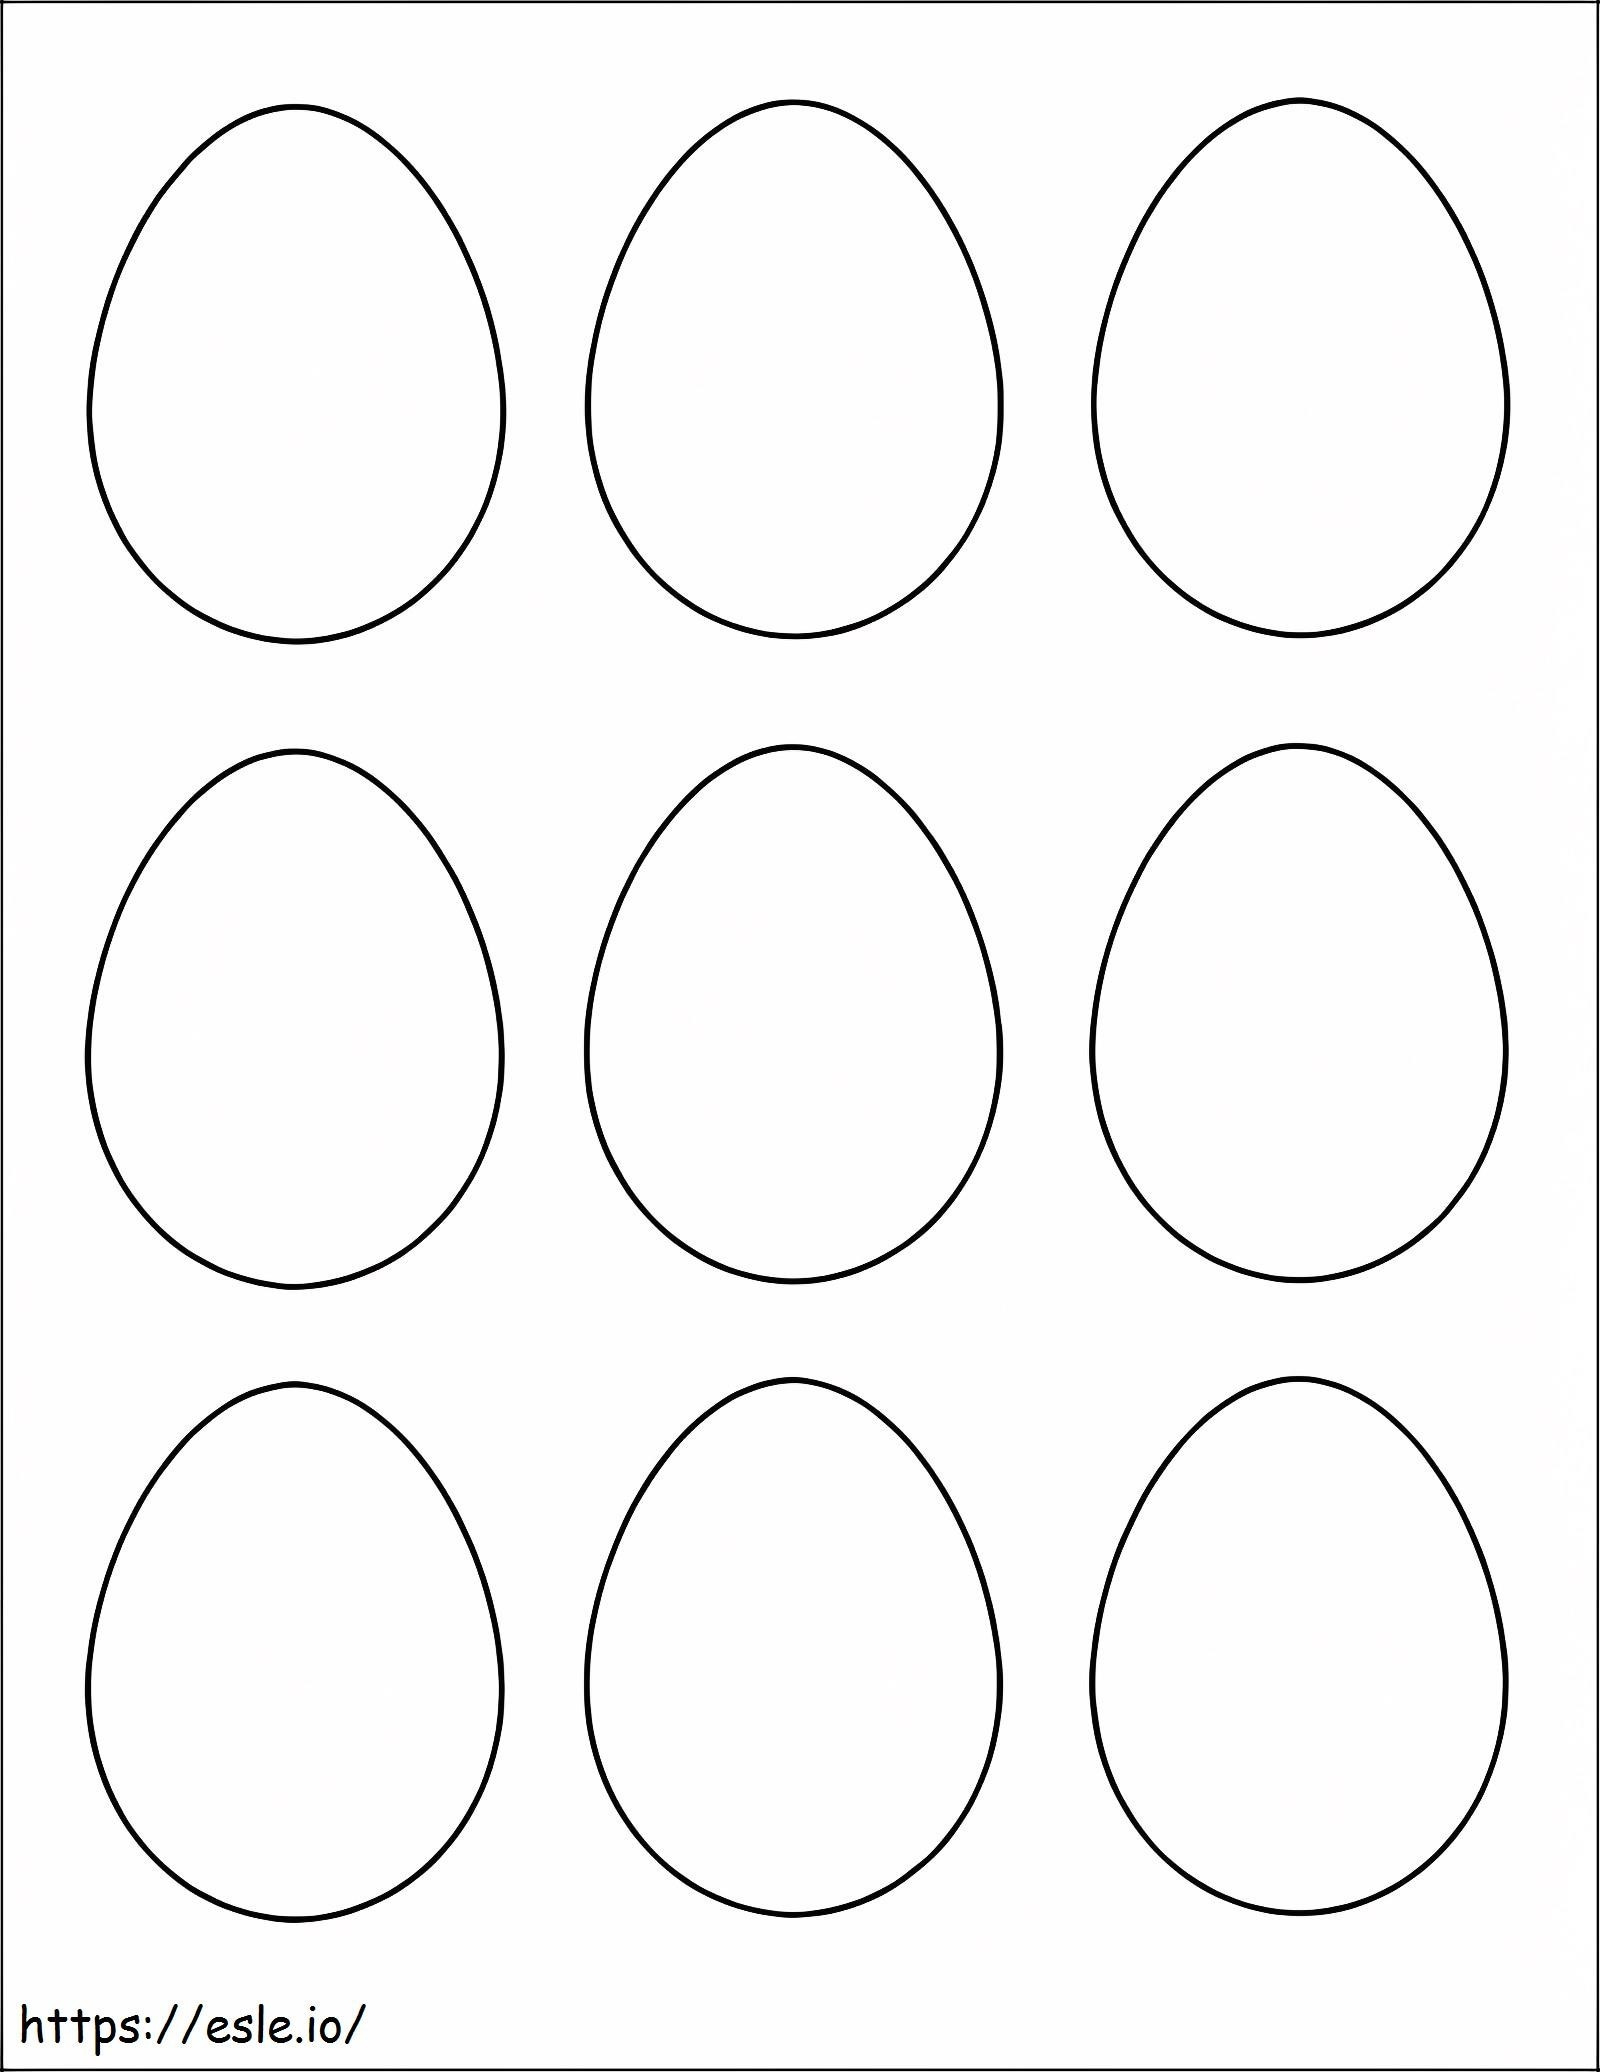 Easy Nine Easter Egg coloring page